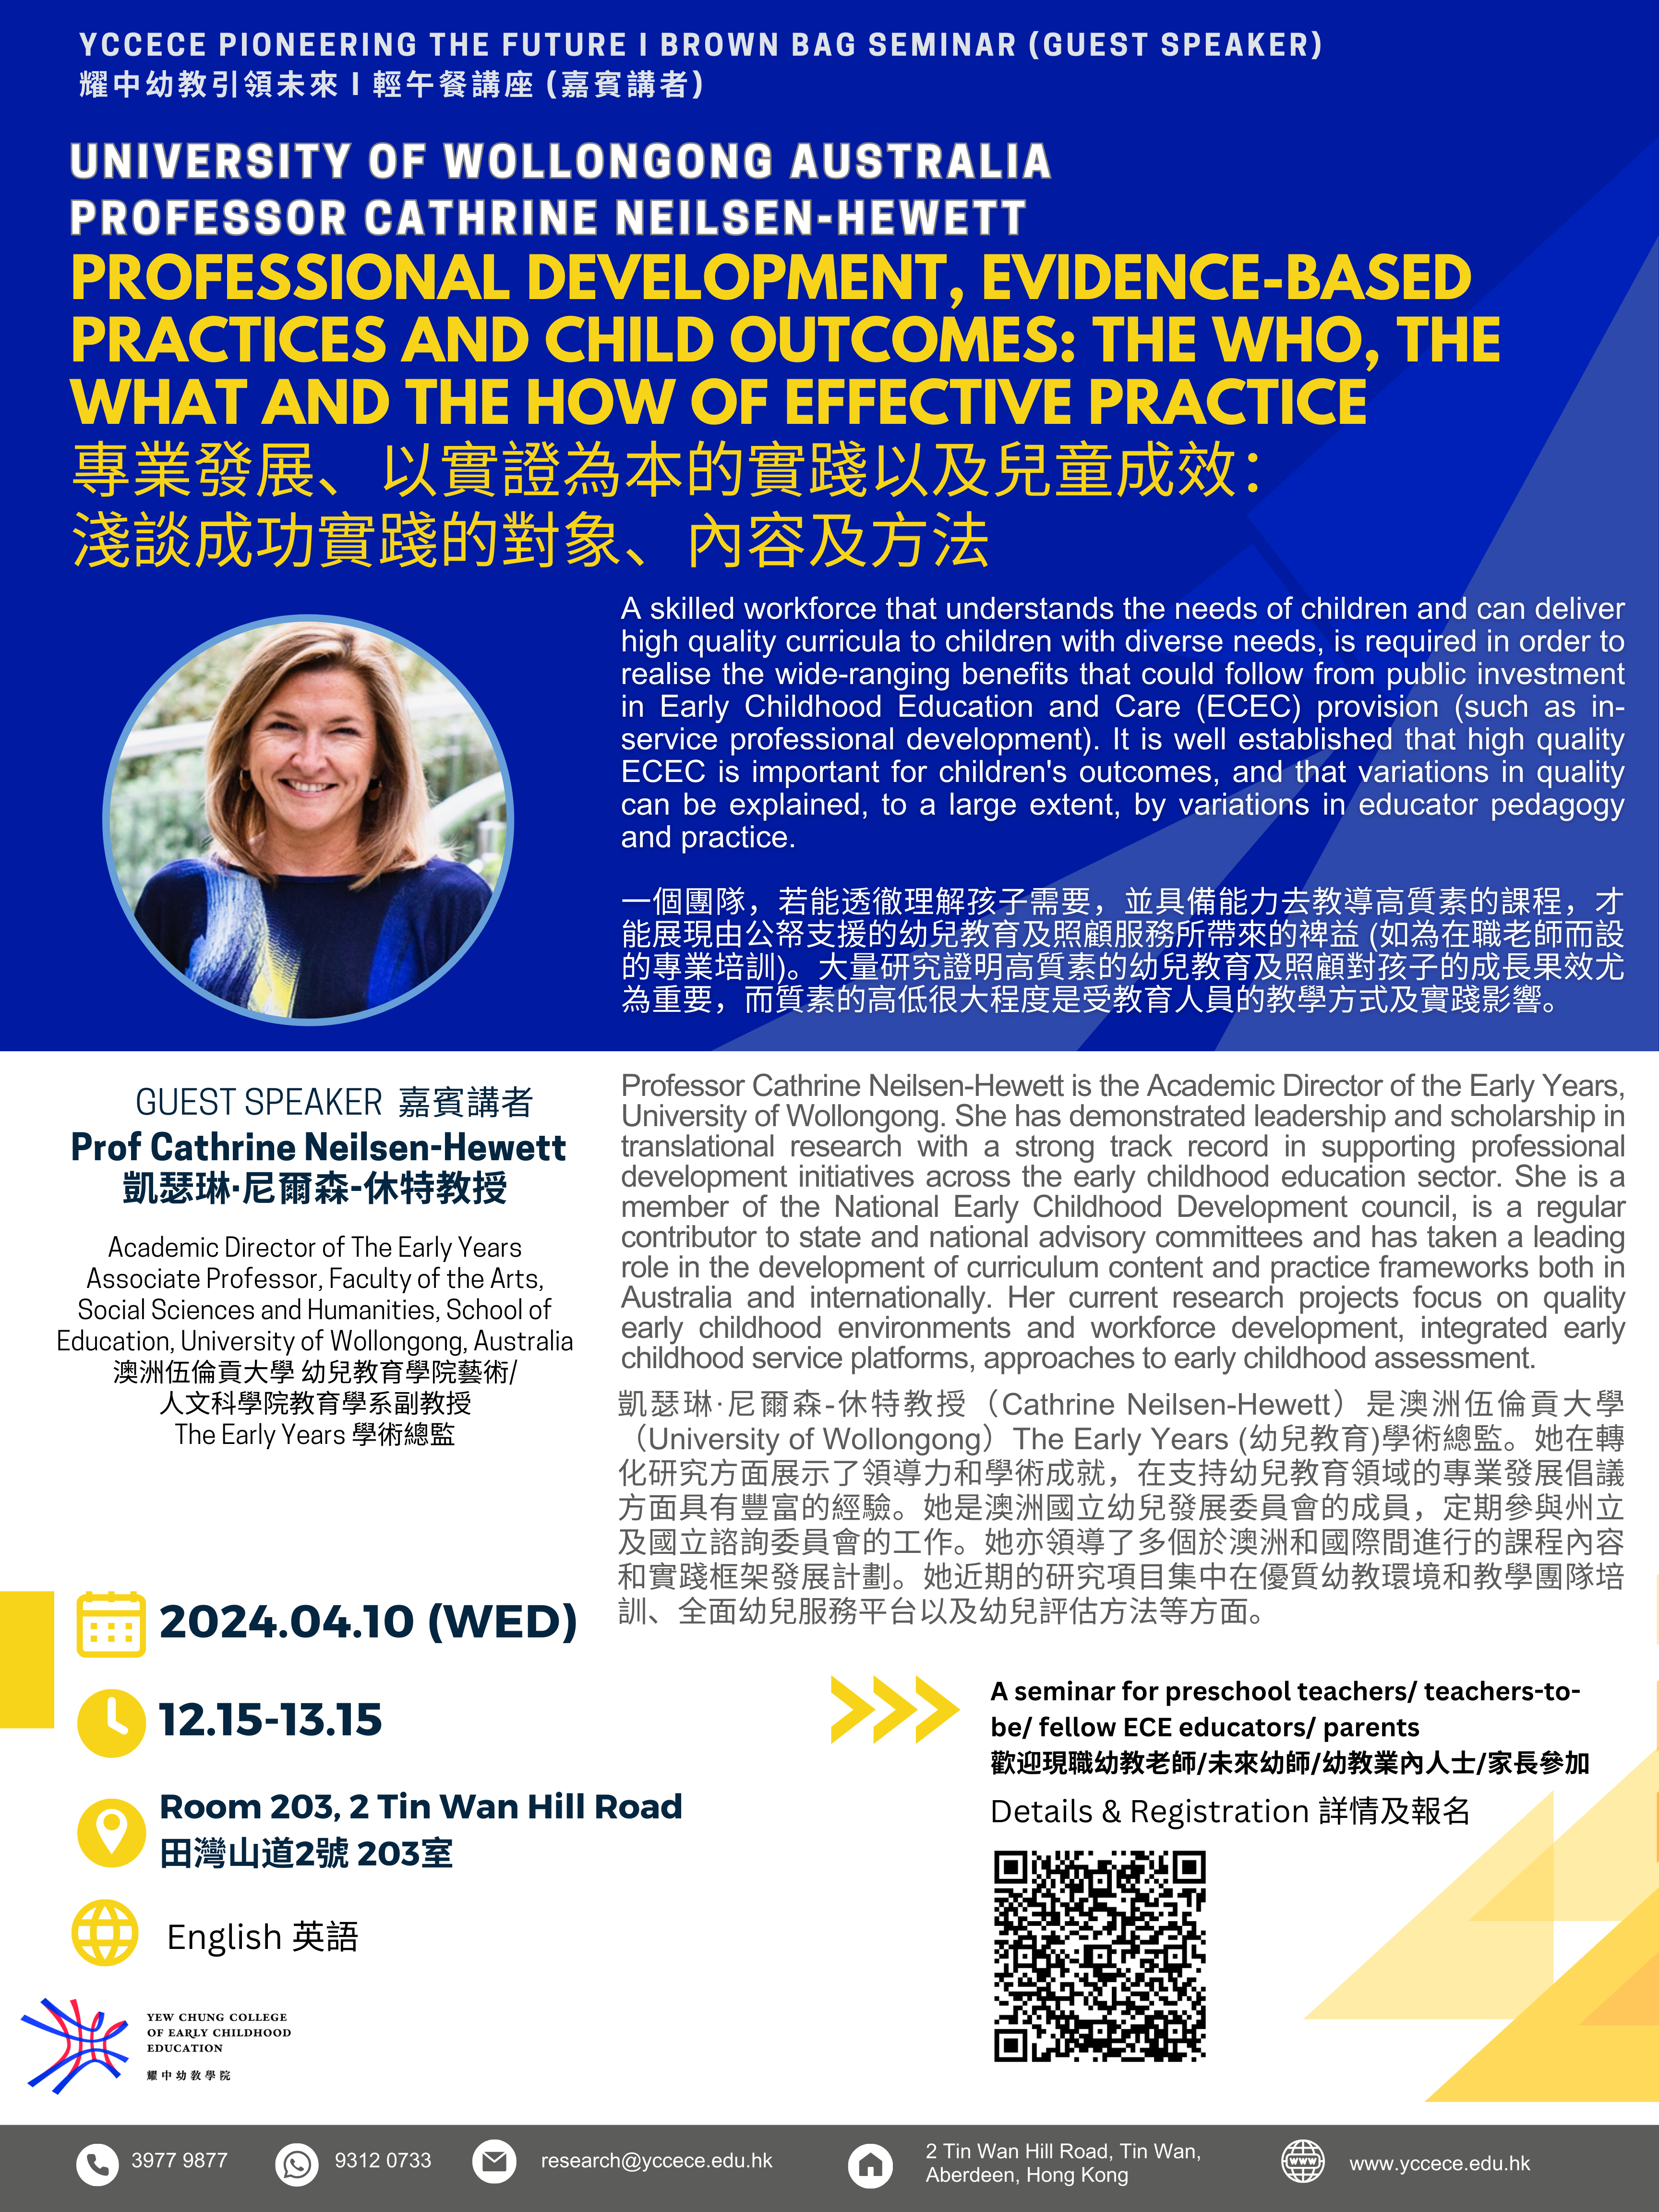 Professional Development, Evidence-based Practices and Child Outcomes: The Who, the What and the How of Effective Practice